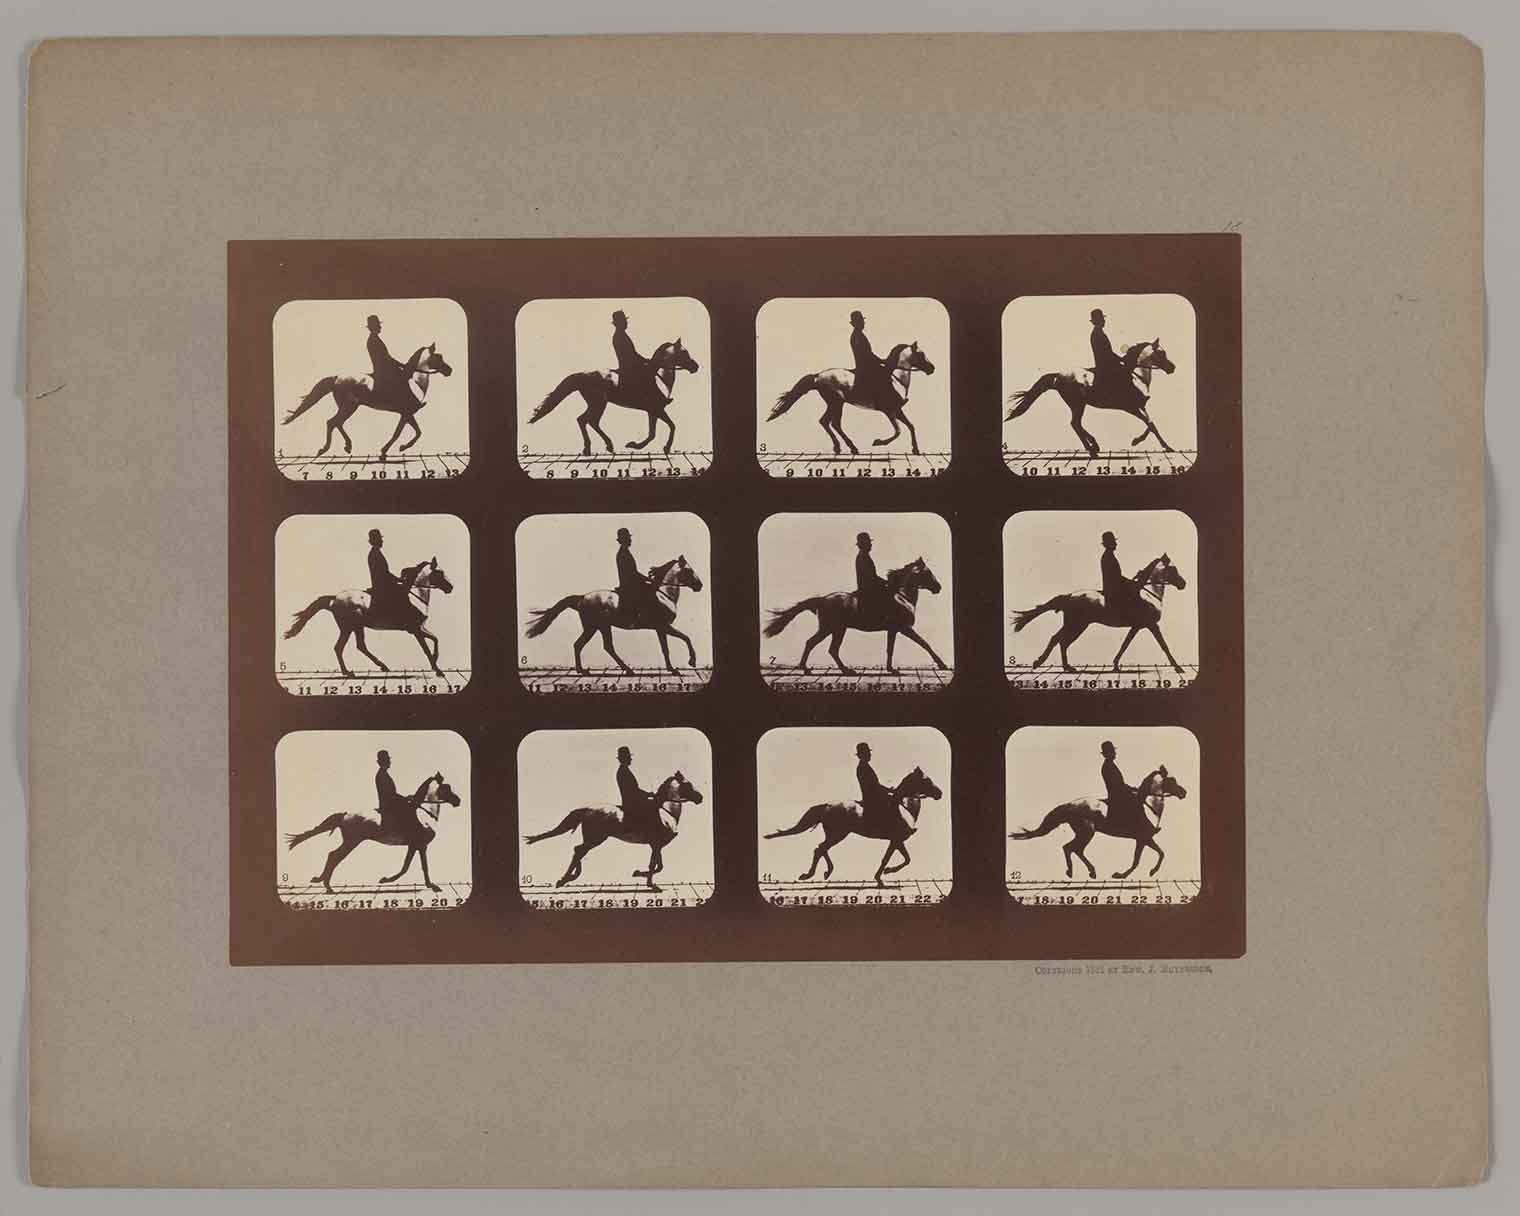 A man seated on a horse is in each frame of a four by three grid.